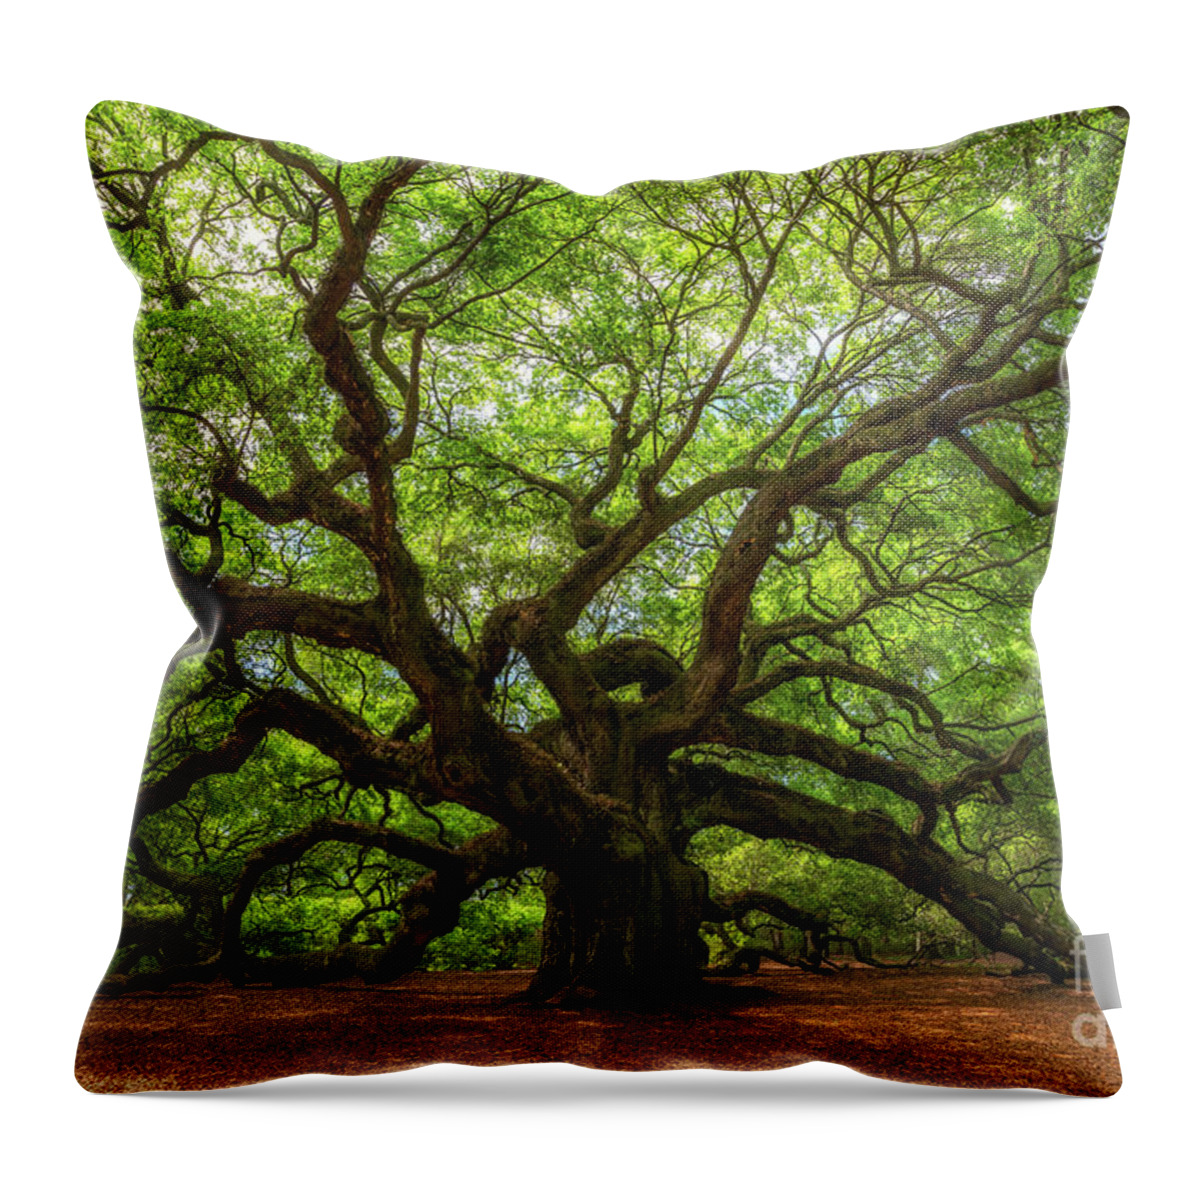 Angel Oak Tree Throw Pillow featuring the photograph The Angel Oak Tree by Michael Ver Sprill